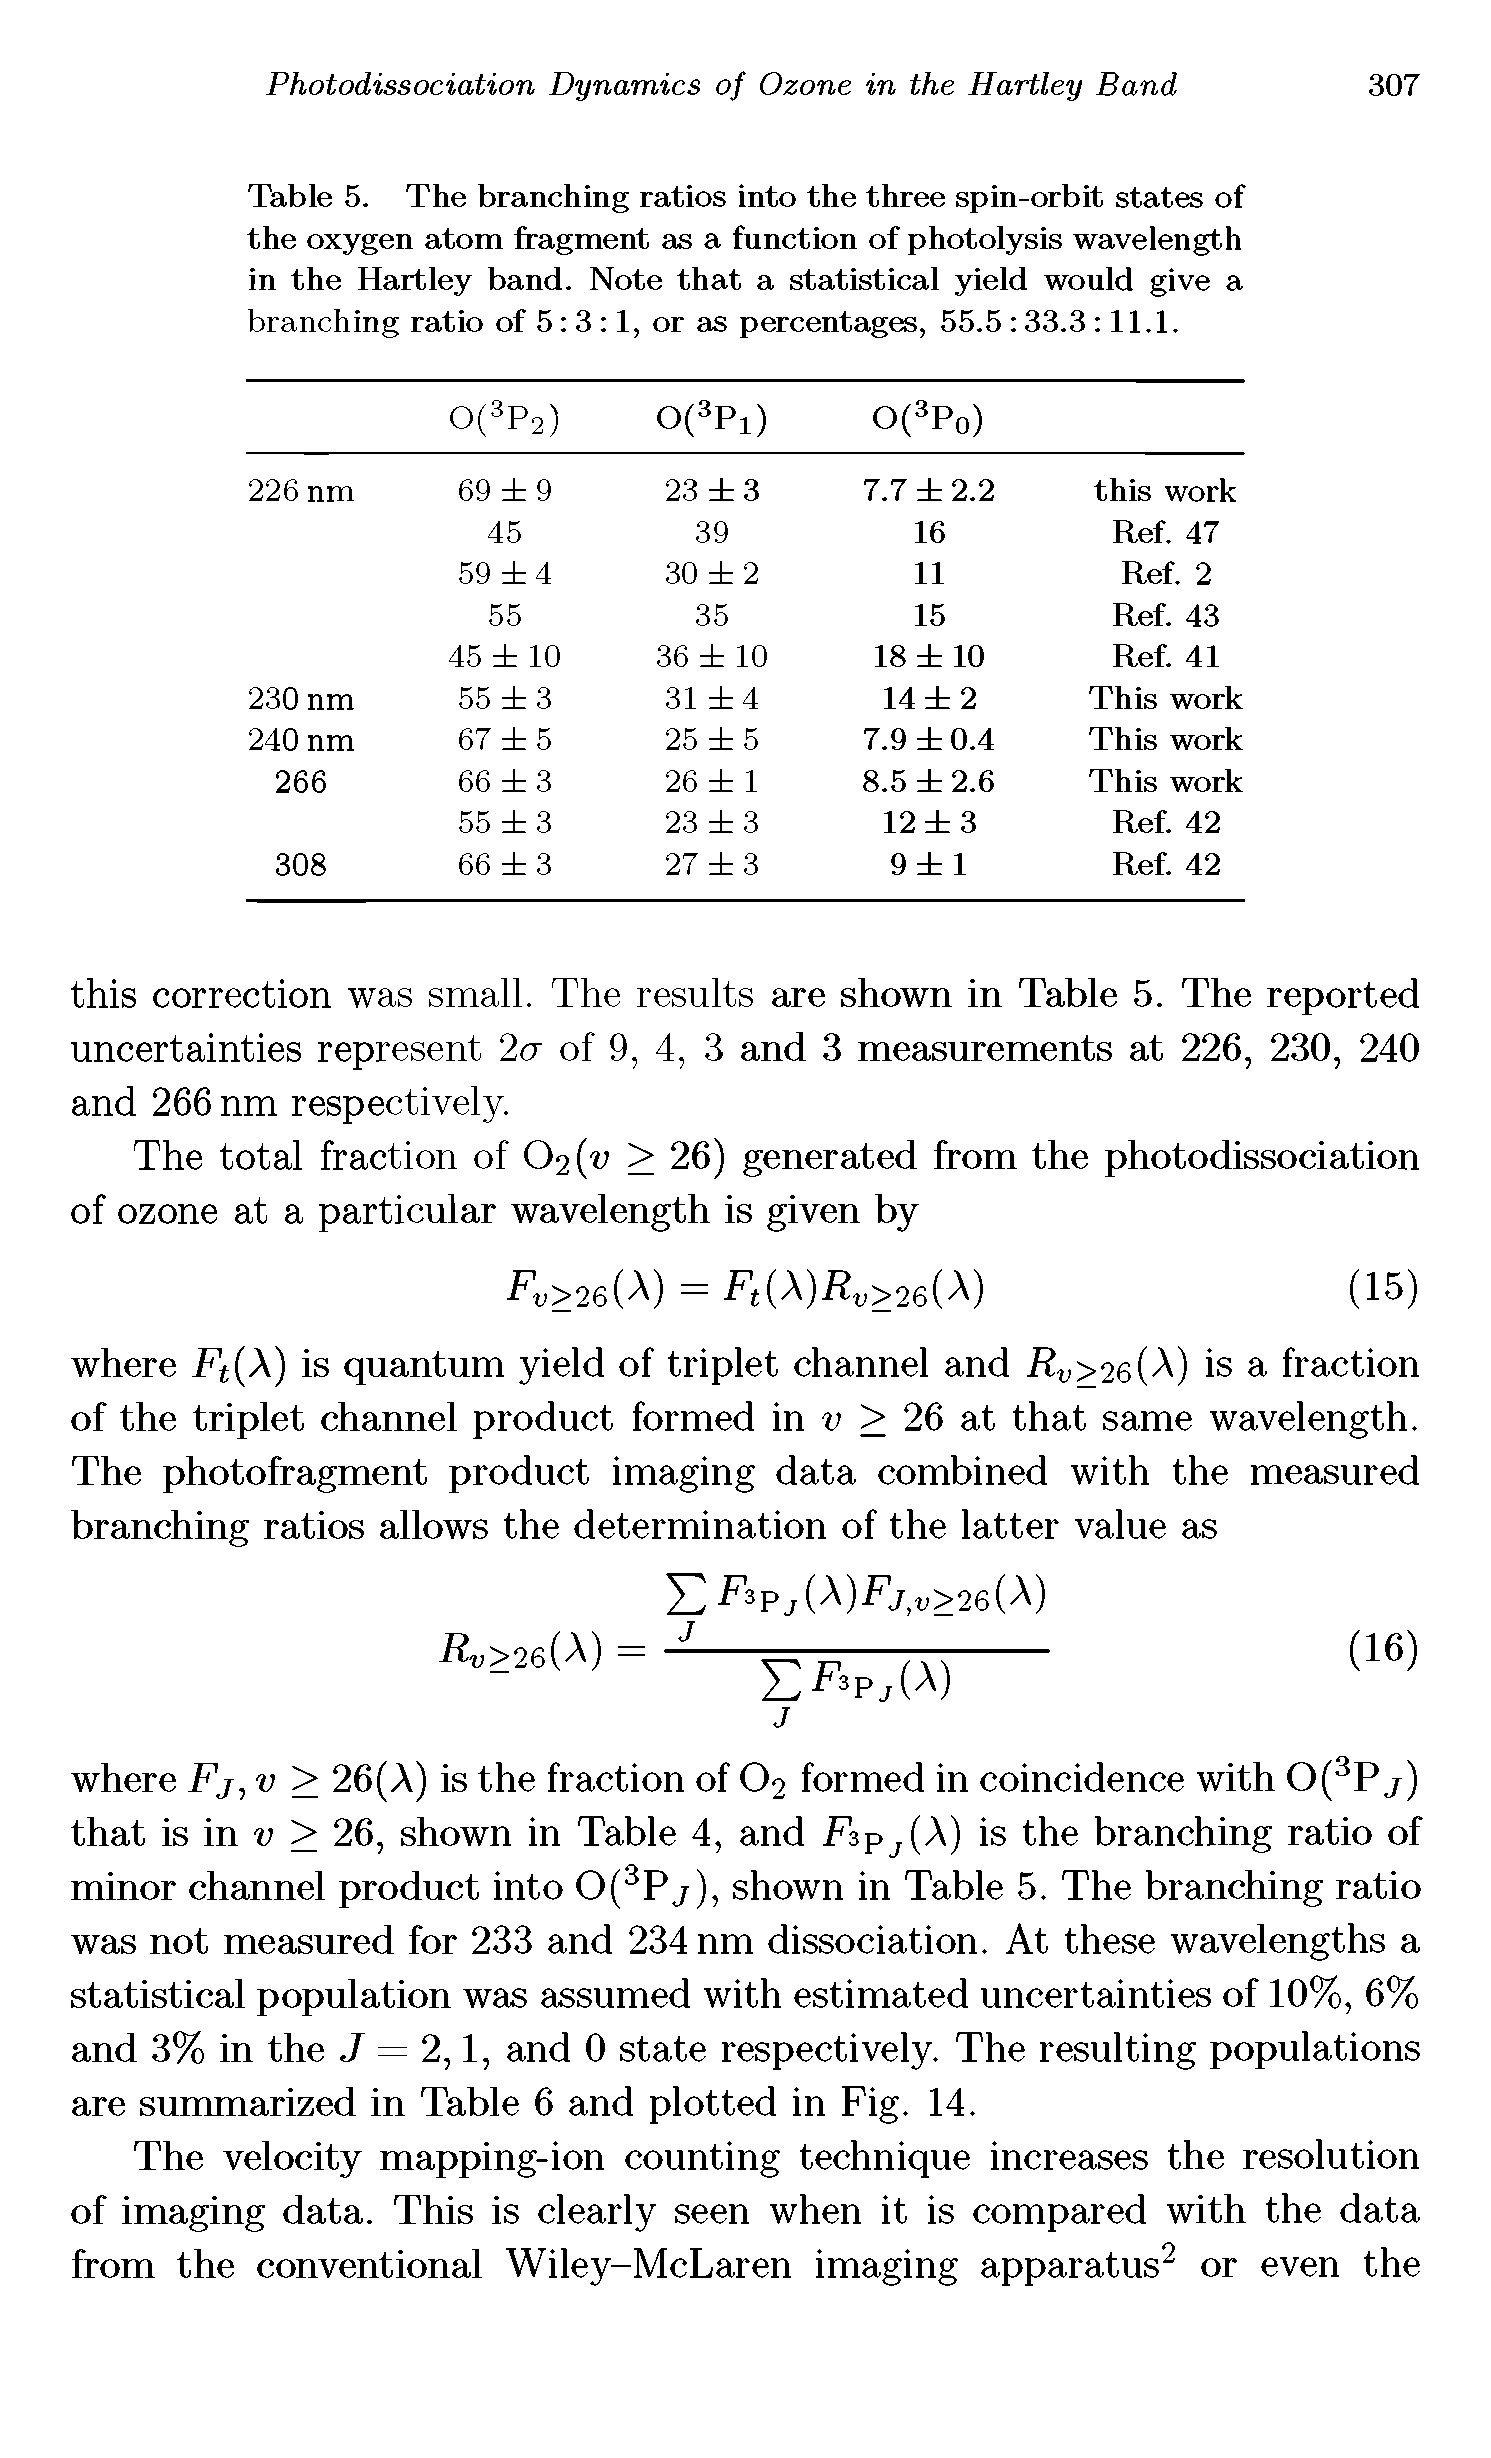 Table 5. The branching ratios into the three spin-orbit states of the oxygen atom fragment as a function of photolysis wavelength in the Hartley band. Note that a statistical yield would give a branching ratio of 5 3 1, or as percentages, 55.5 33.3 11.1.